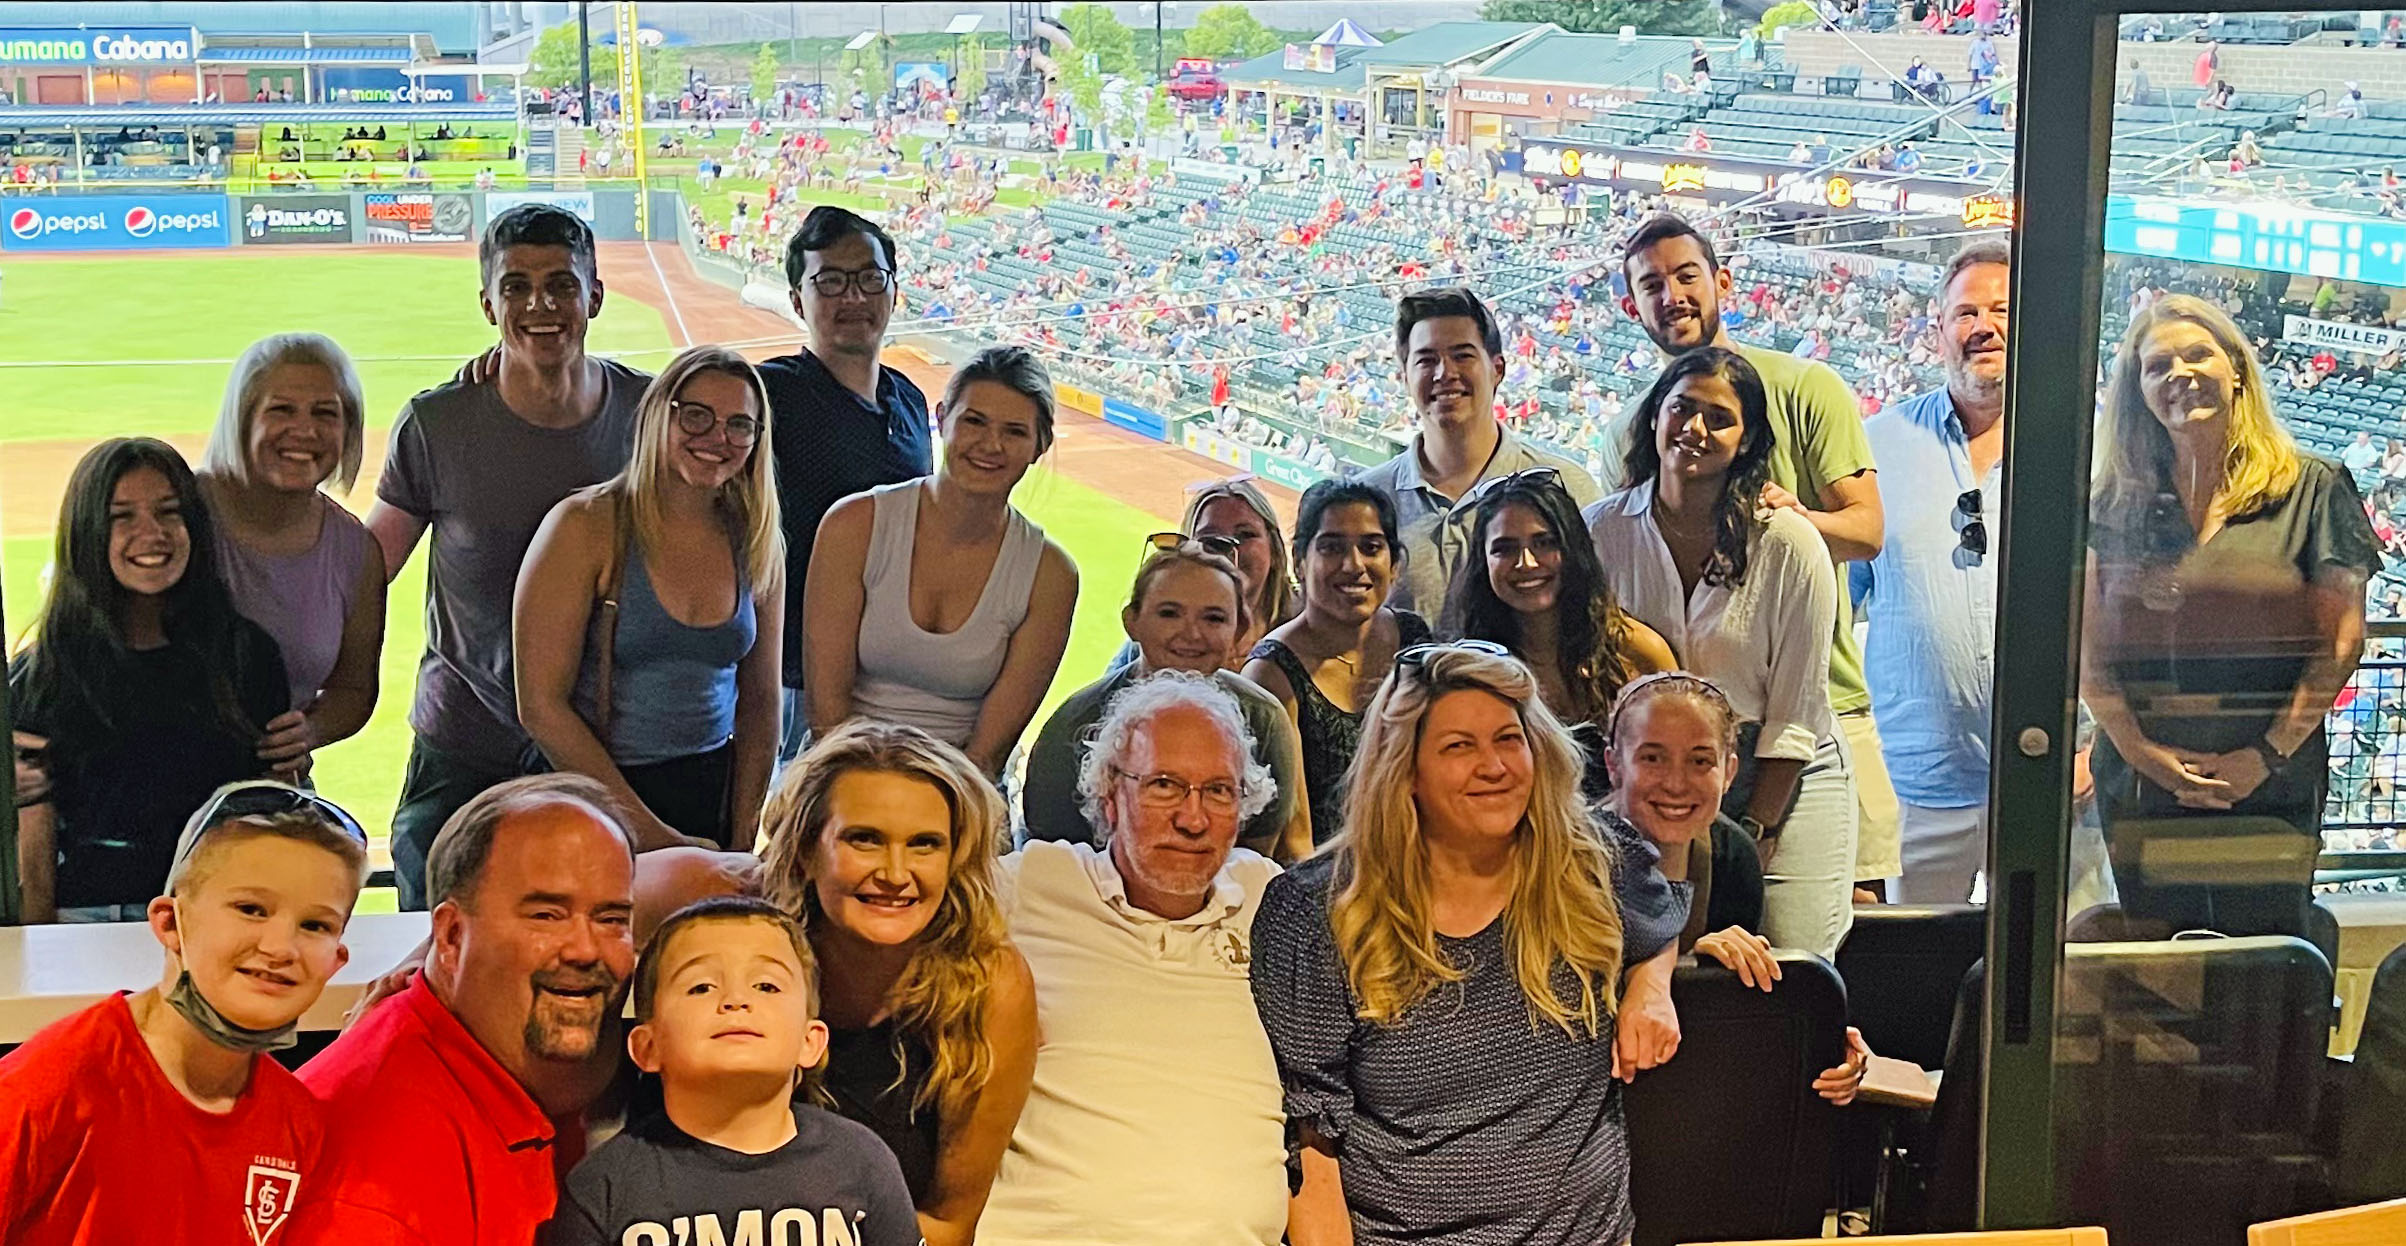 Residents and families at a baseball game. July 2022